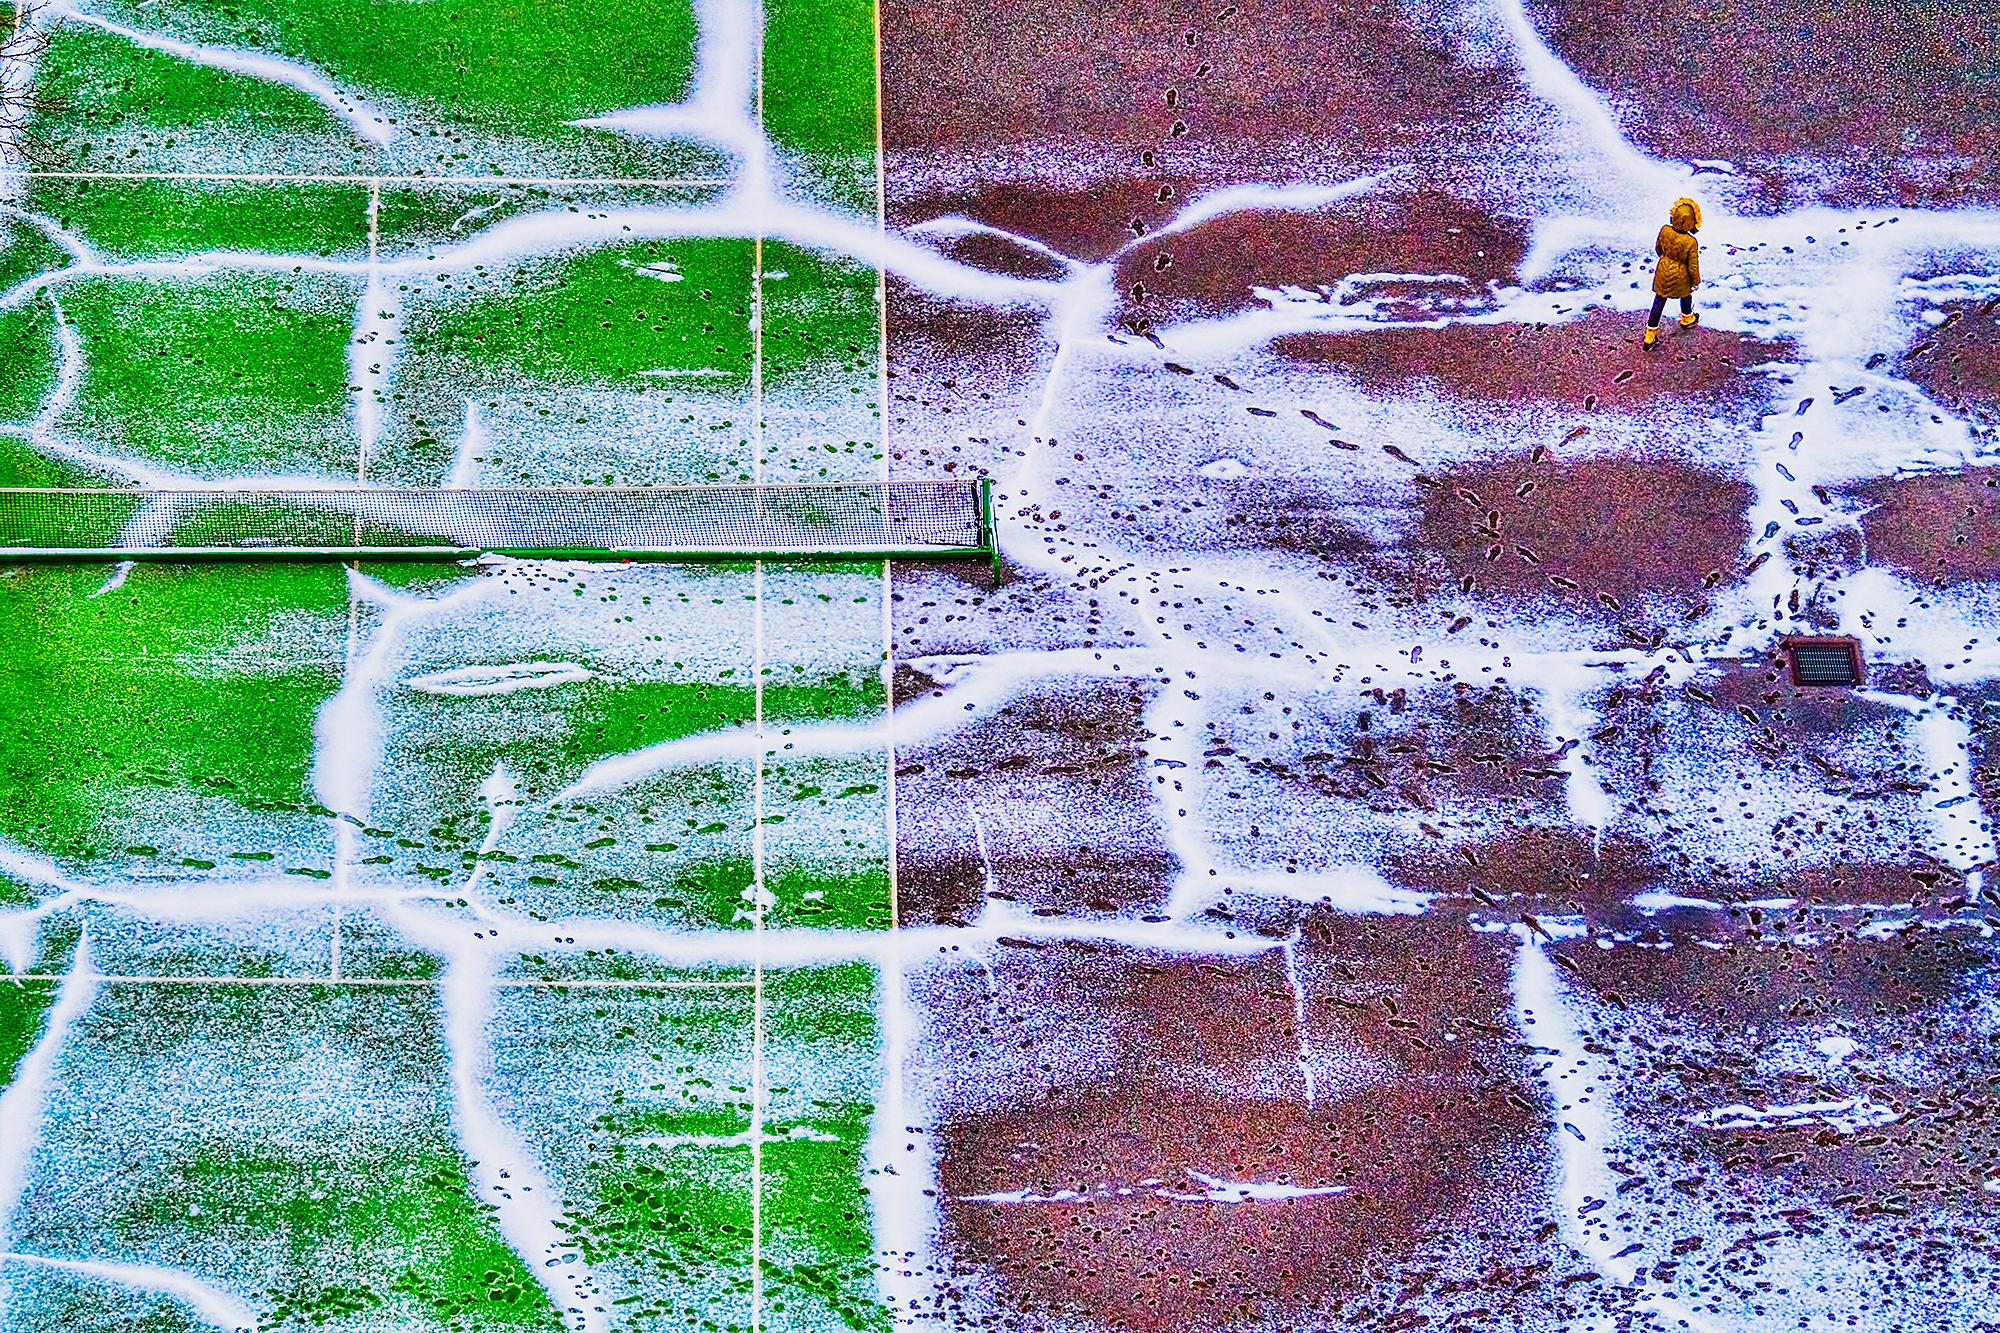 Mitchell Funk Landscape Photograph - Tennis Court in Snow with Footprints  Green and Wine Color Abstraction 